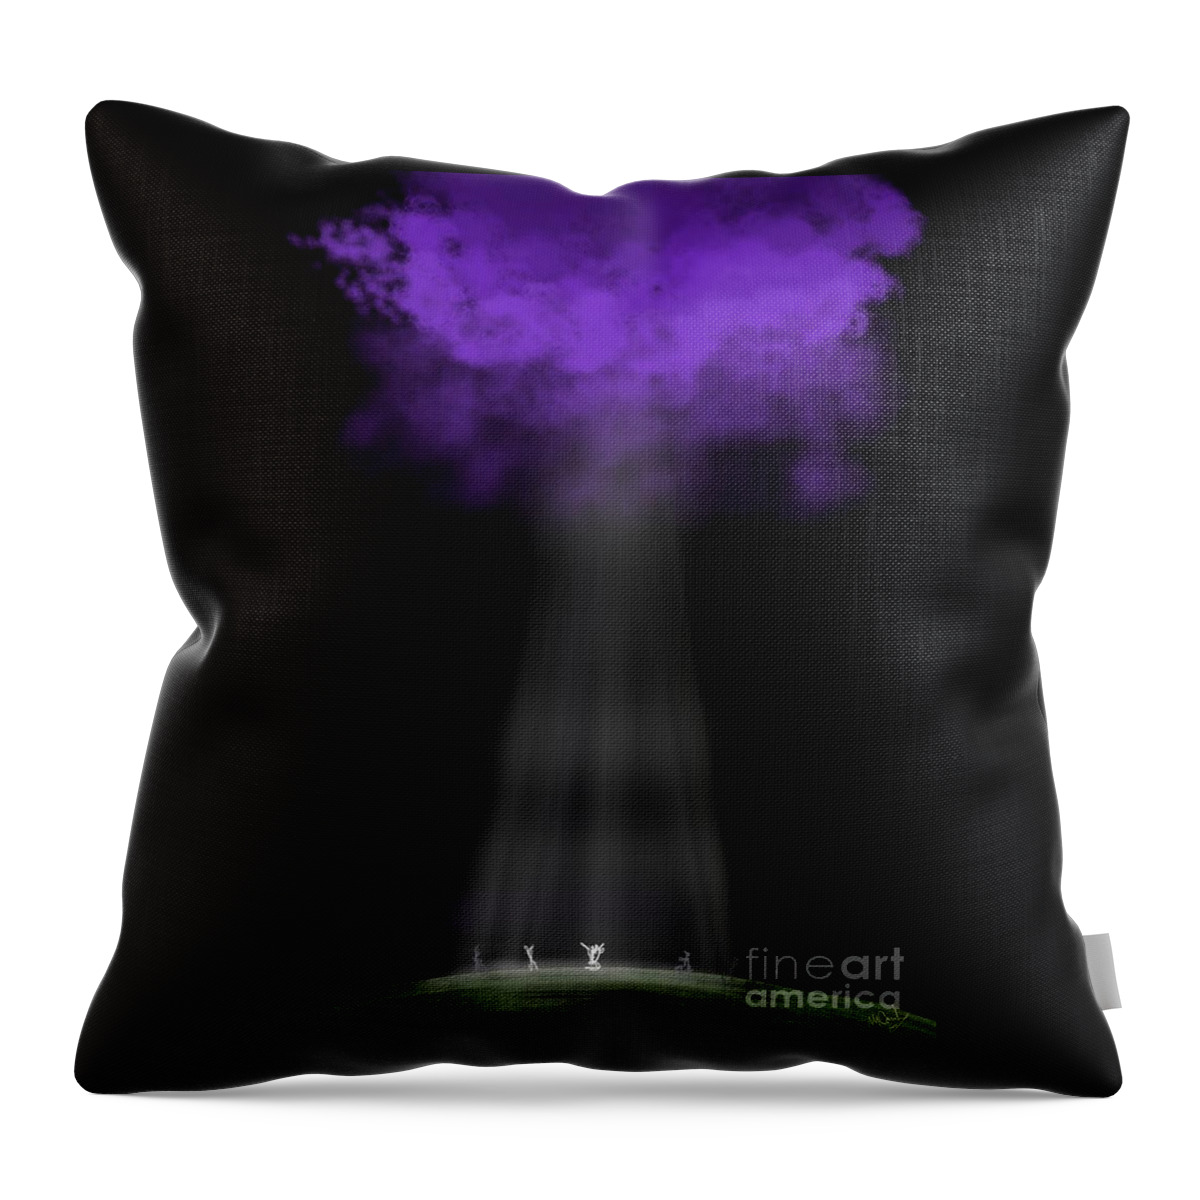 Spiritual Throw Pillow featuring the mixed media The Calling by Michael Combs